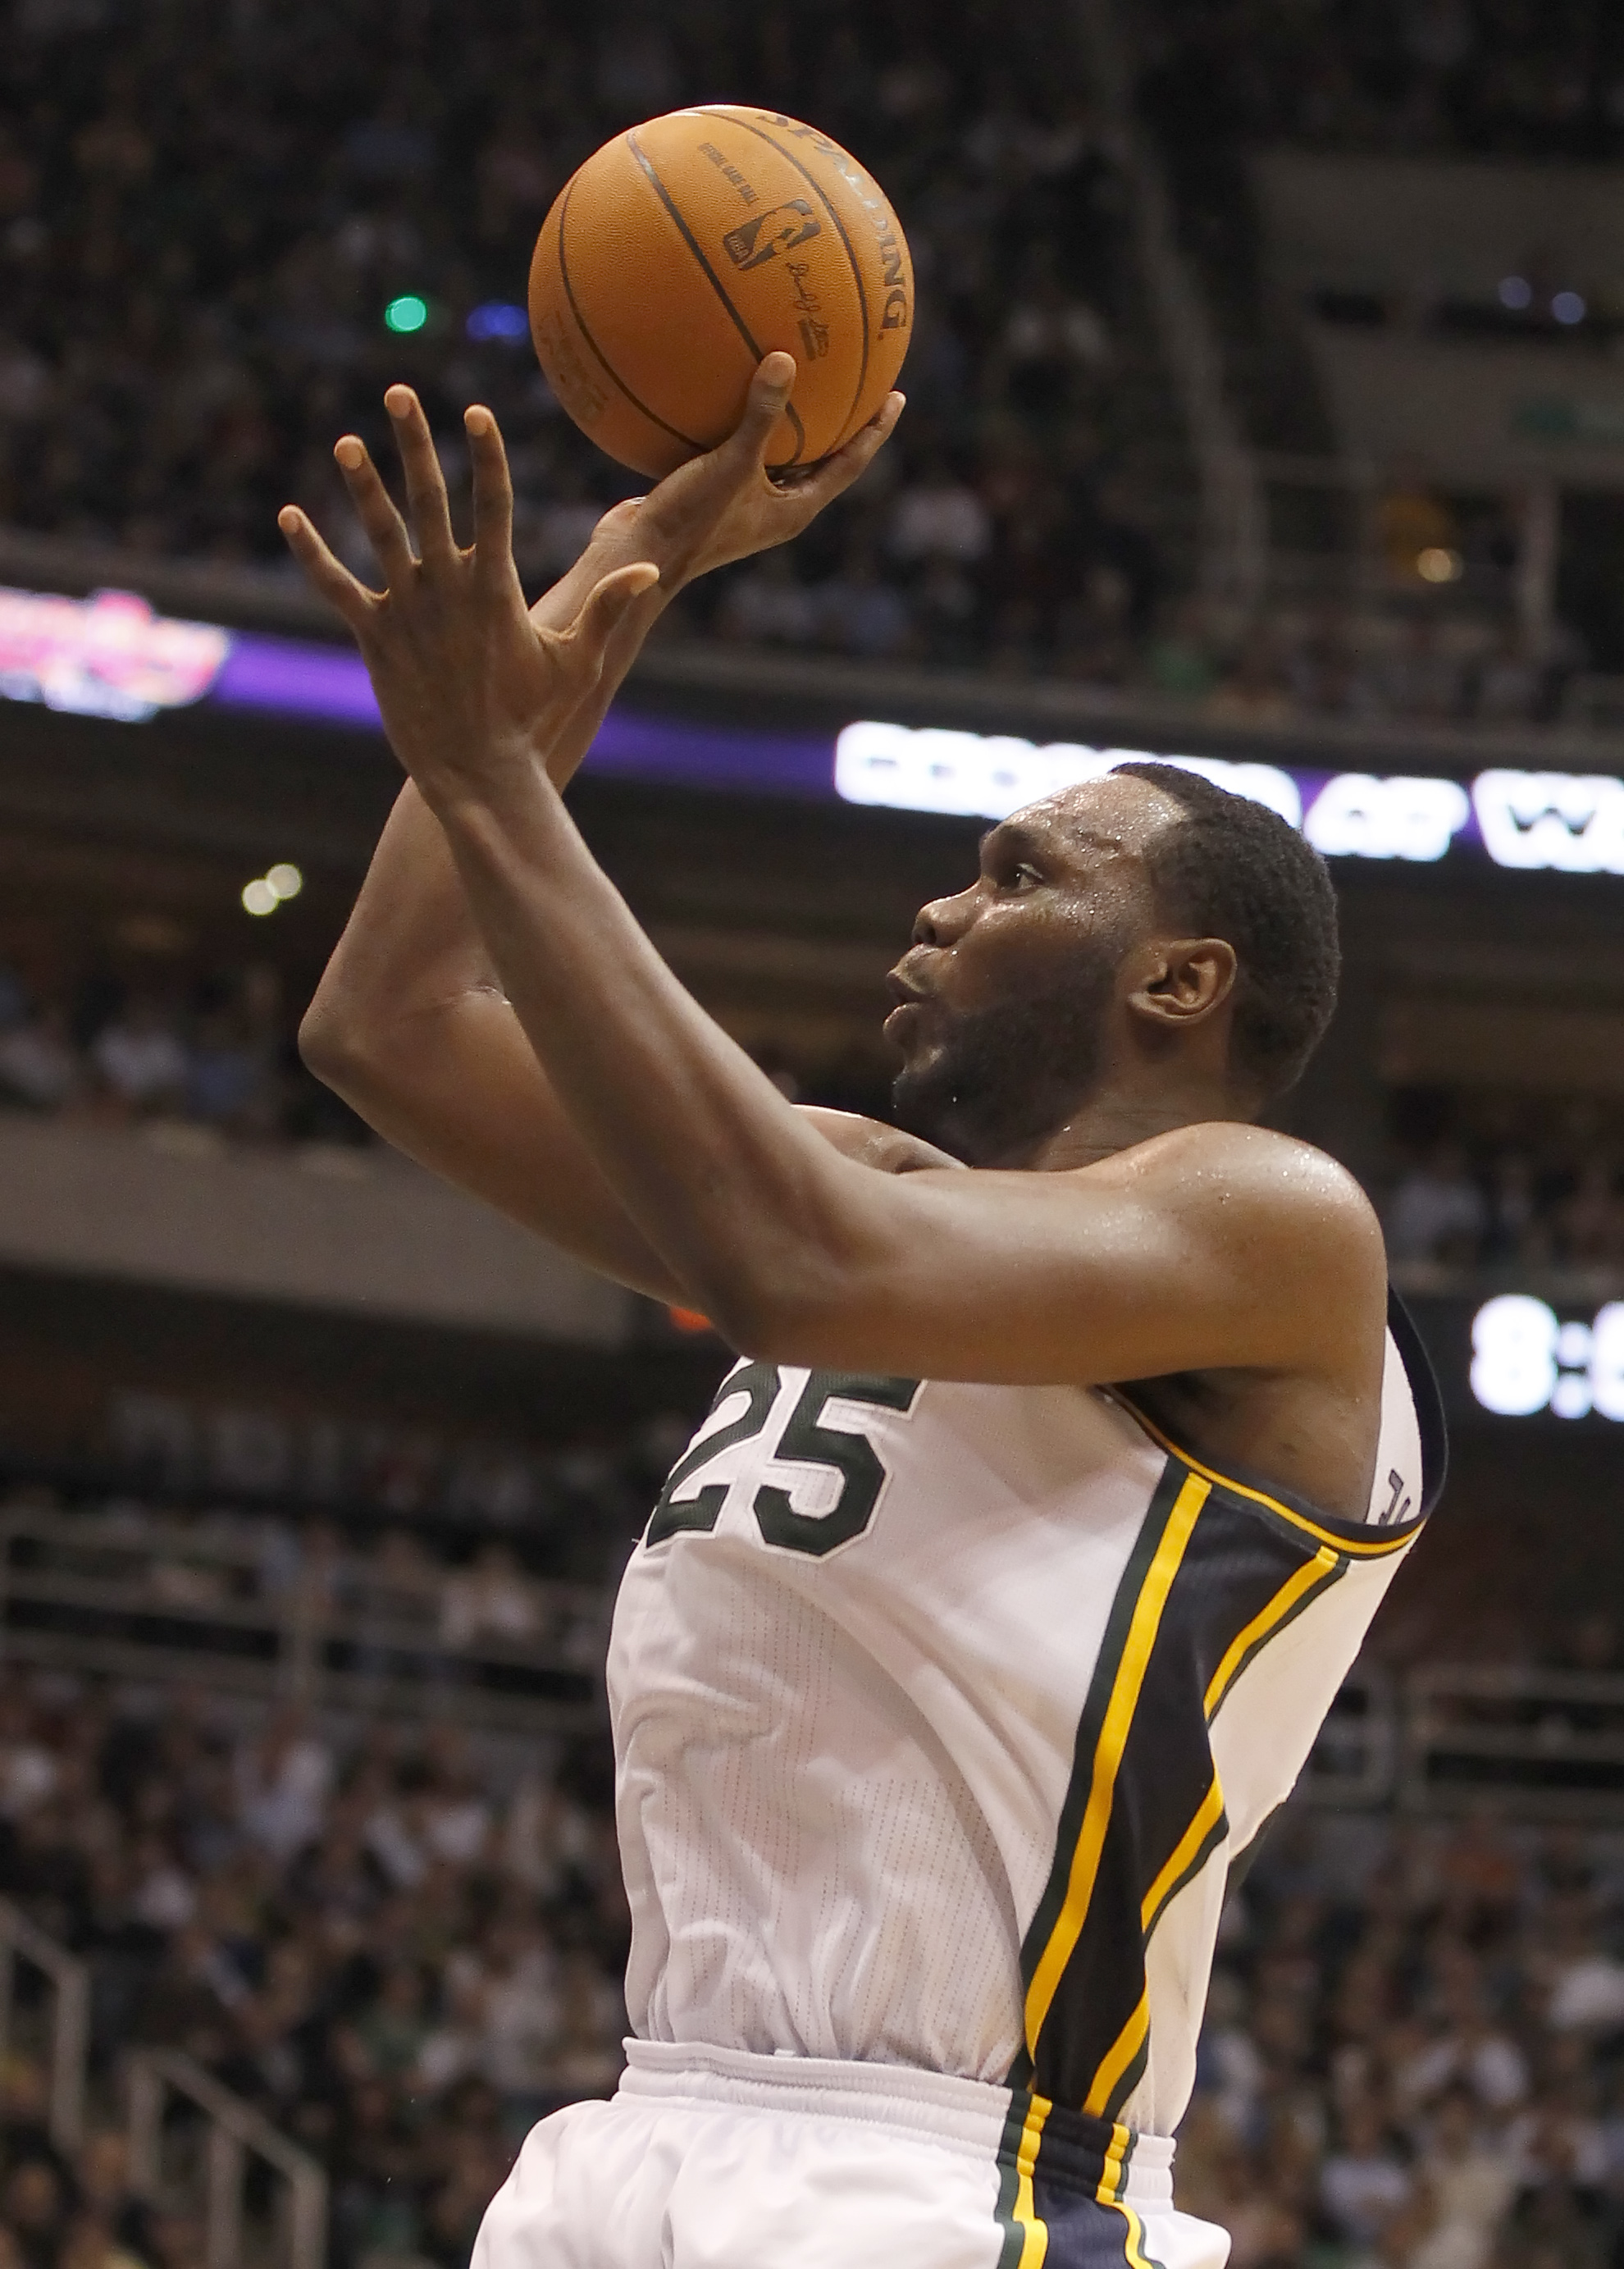 SALT LAKE CITY, UT - DECEMBER 8:  Al Jefferson #25 of the Utah Jazz shoots the ball during a game against the Miami Heat during the second half of an NBA game December 8, 2010 at Energy Solutions Arena in Salt Lake City, Utah. The Heat beat the Jazz 111-9